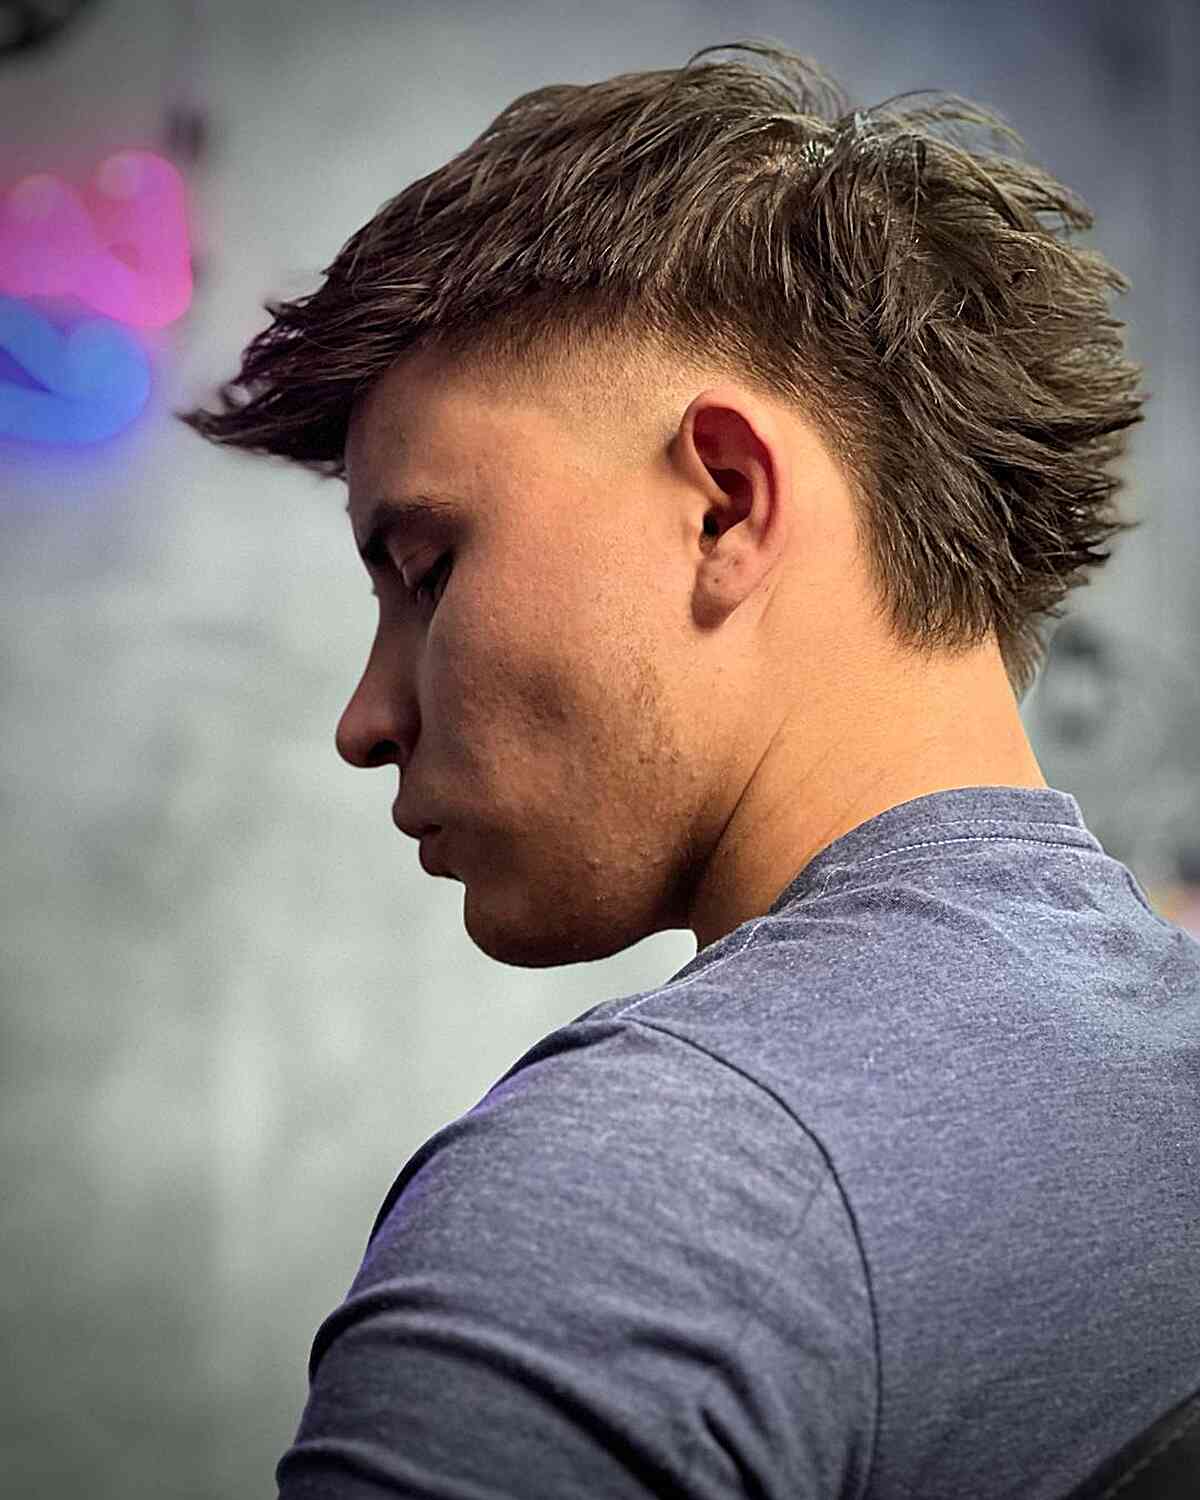 Spiked Mullet Fade Haircut on Guys